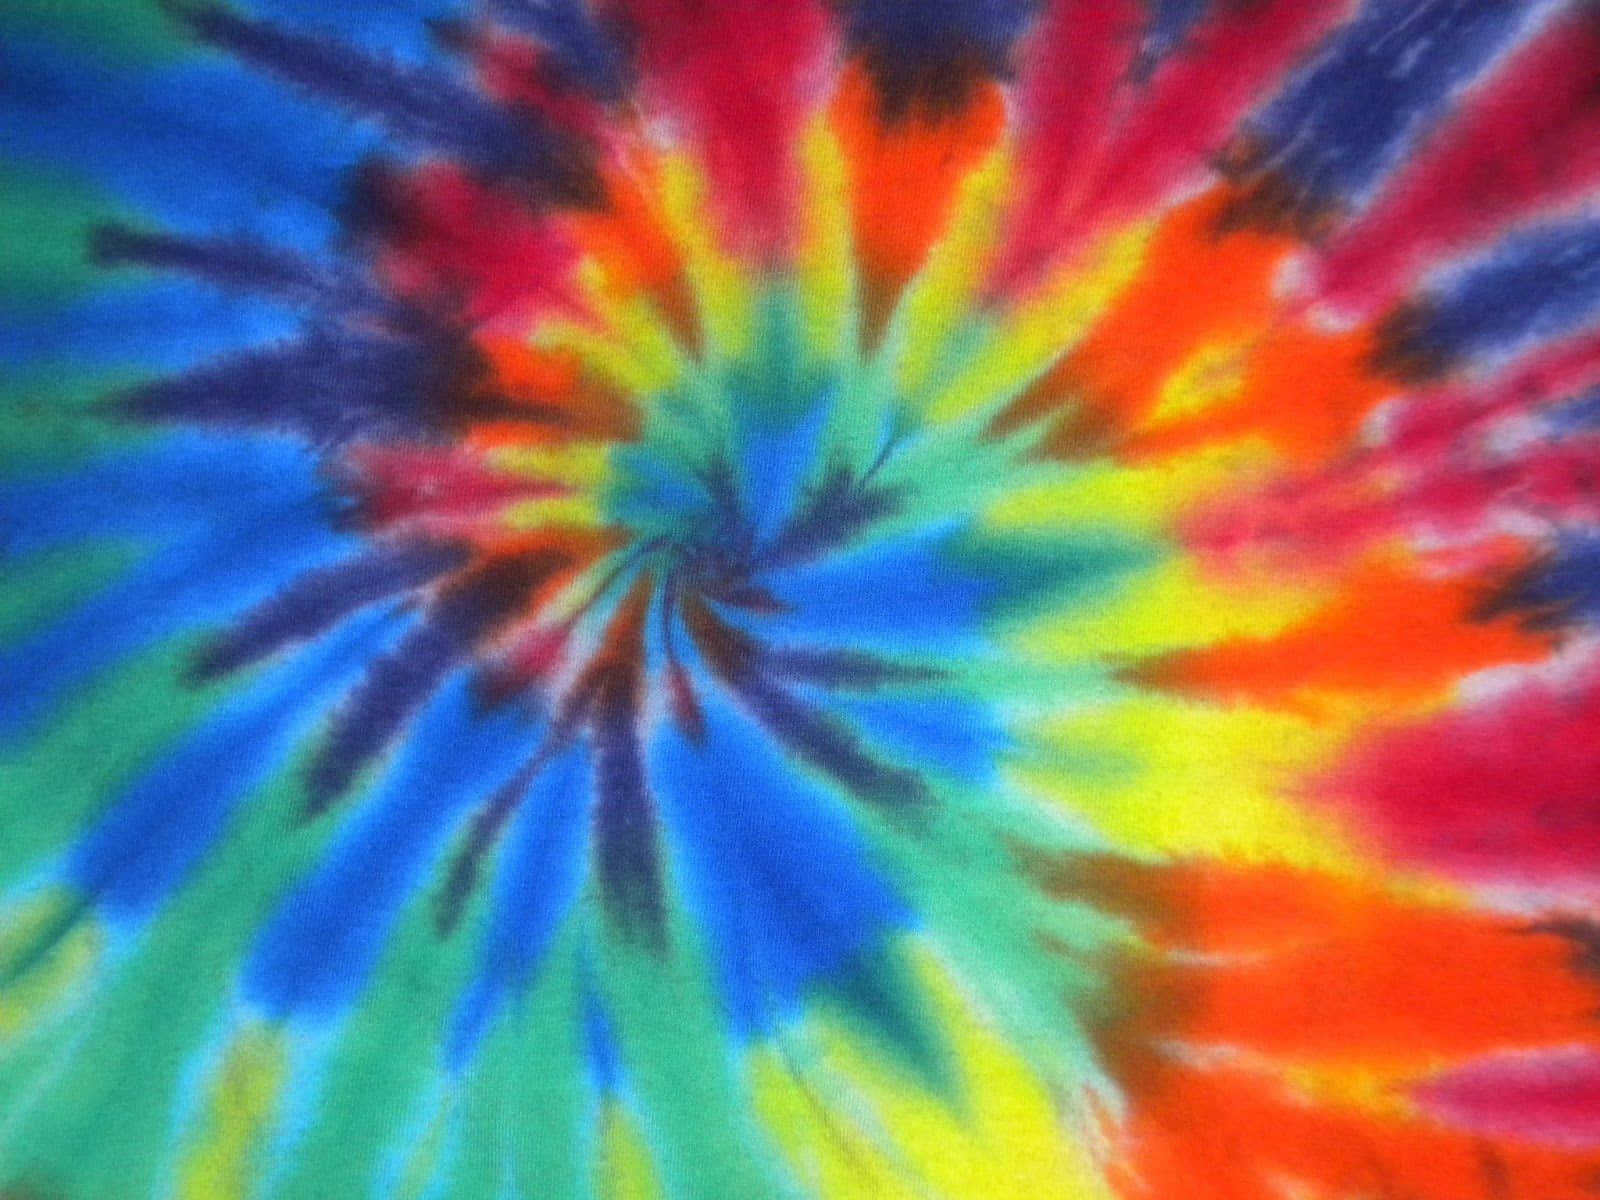 “Add a Pop of Vibrant Color to Your Outfit With Tie Dye”